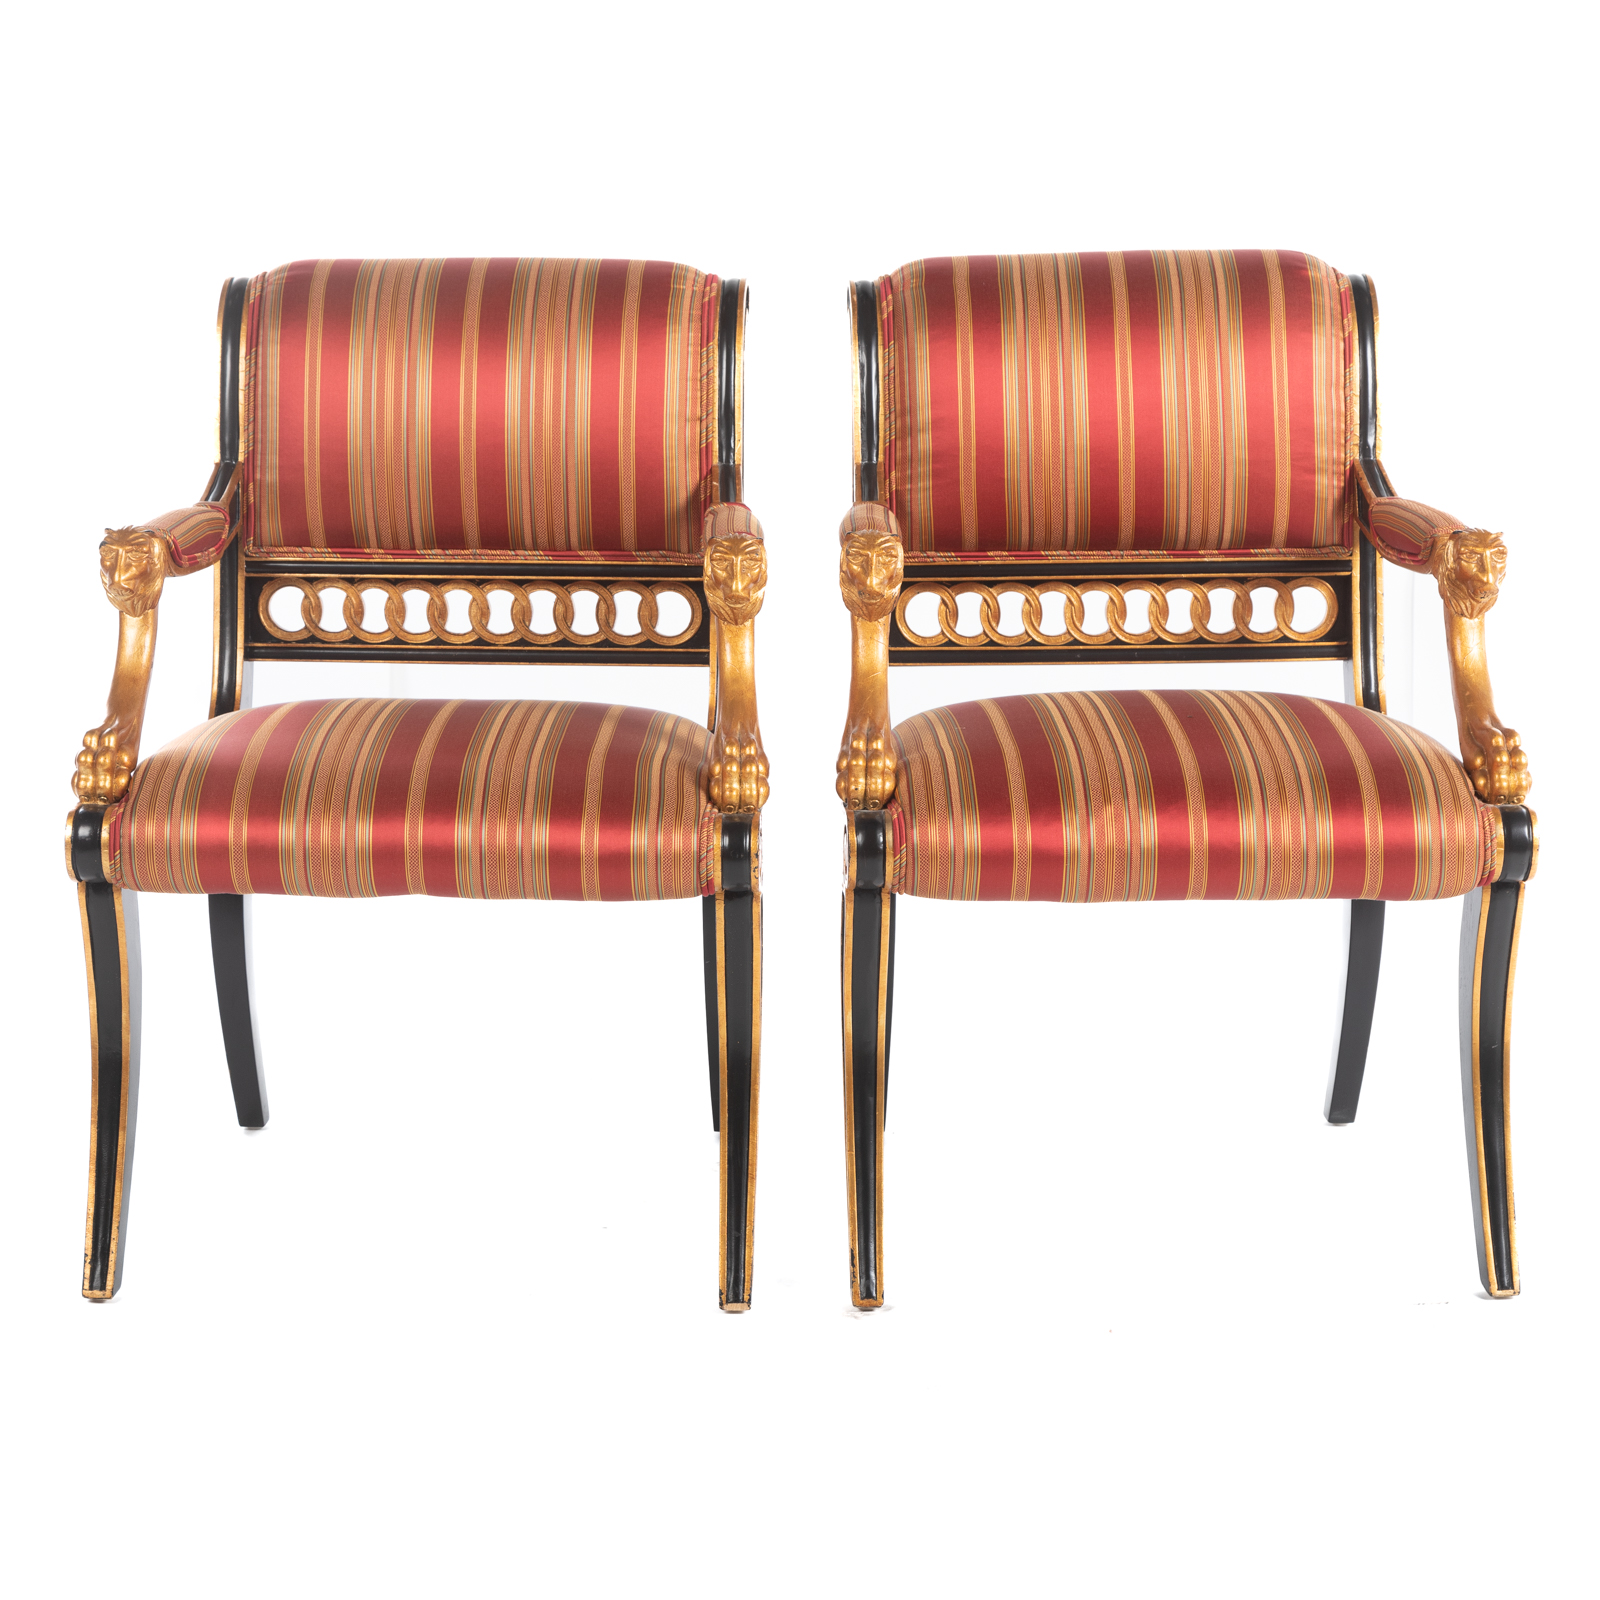 A PAIR OF NEOCLASSICAL STYLE ARMCHAIRS 36985e